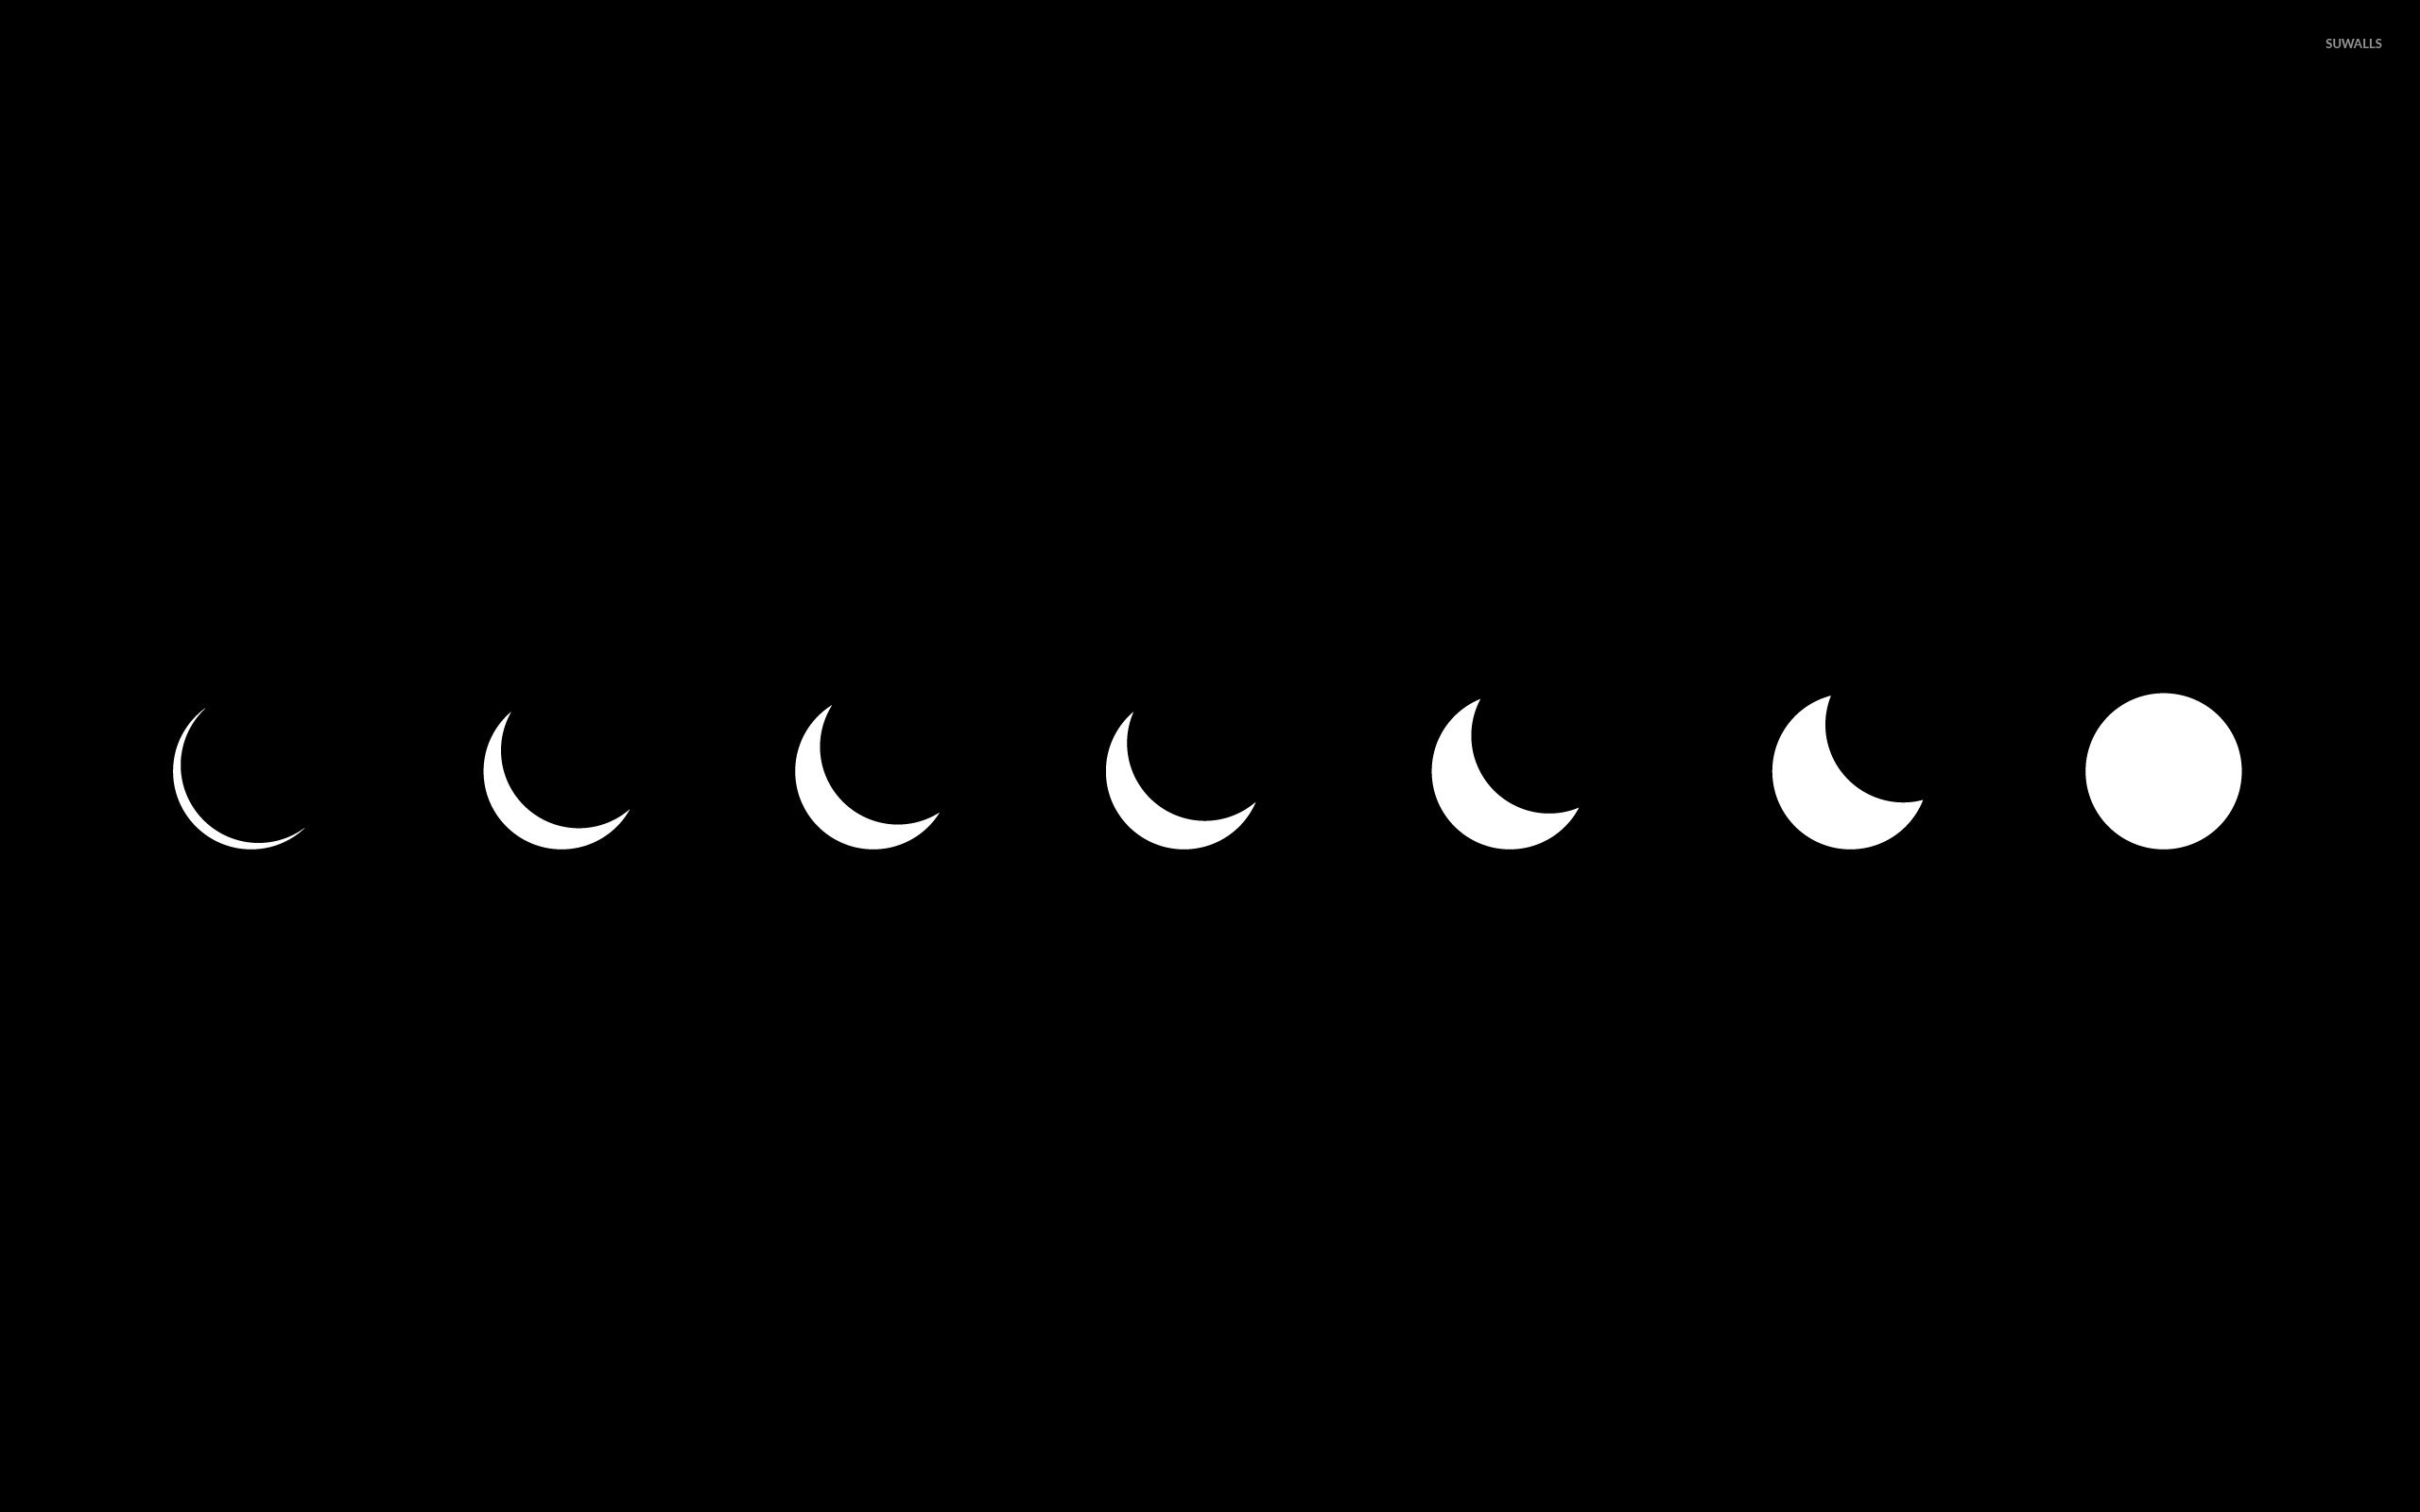 Phases of the moon wallpaper   Vector wallpapers   44719 2560x1600